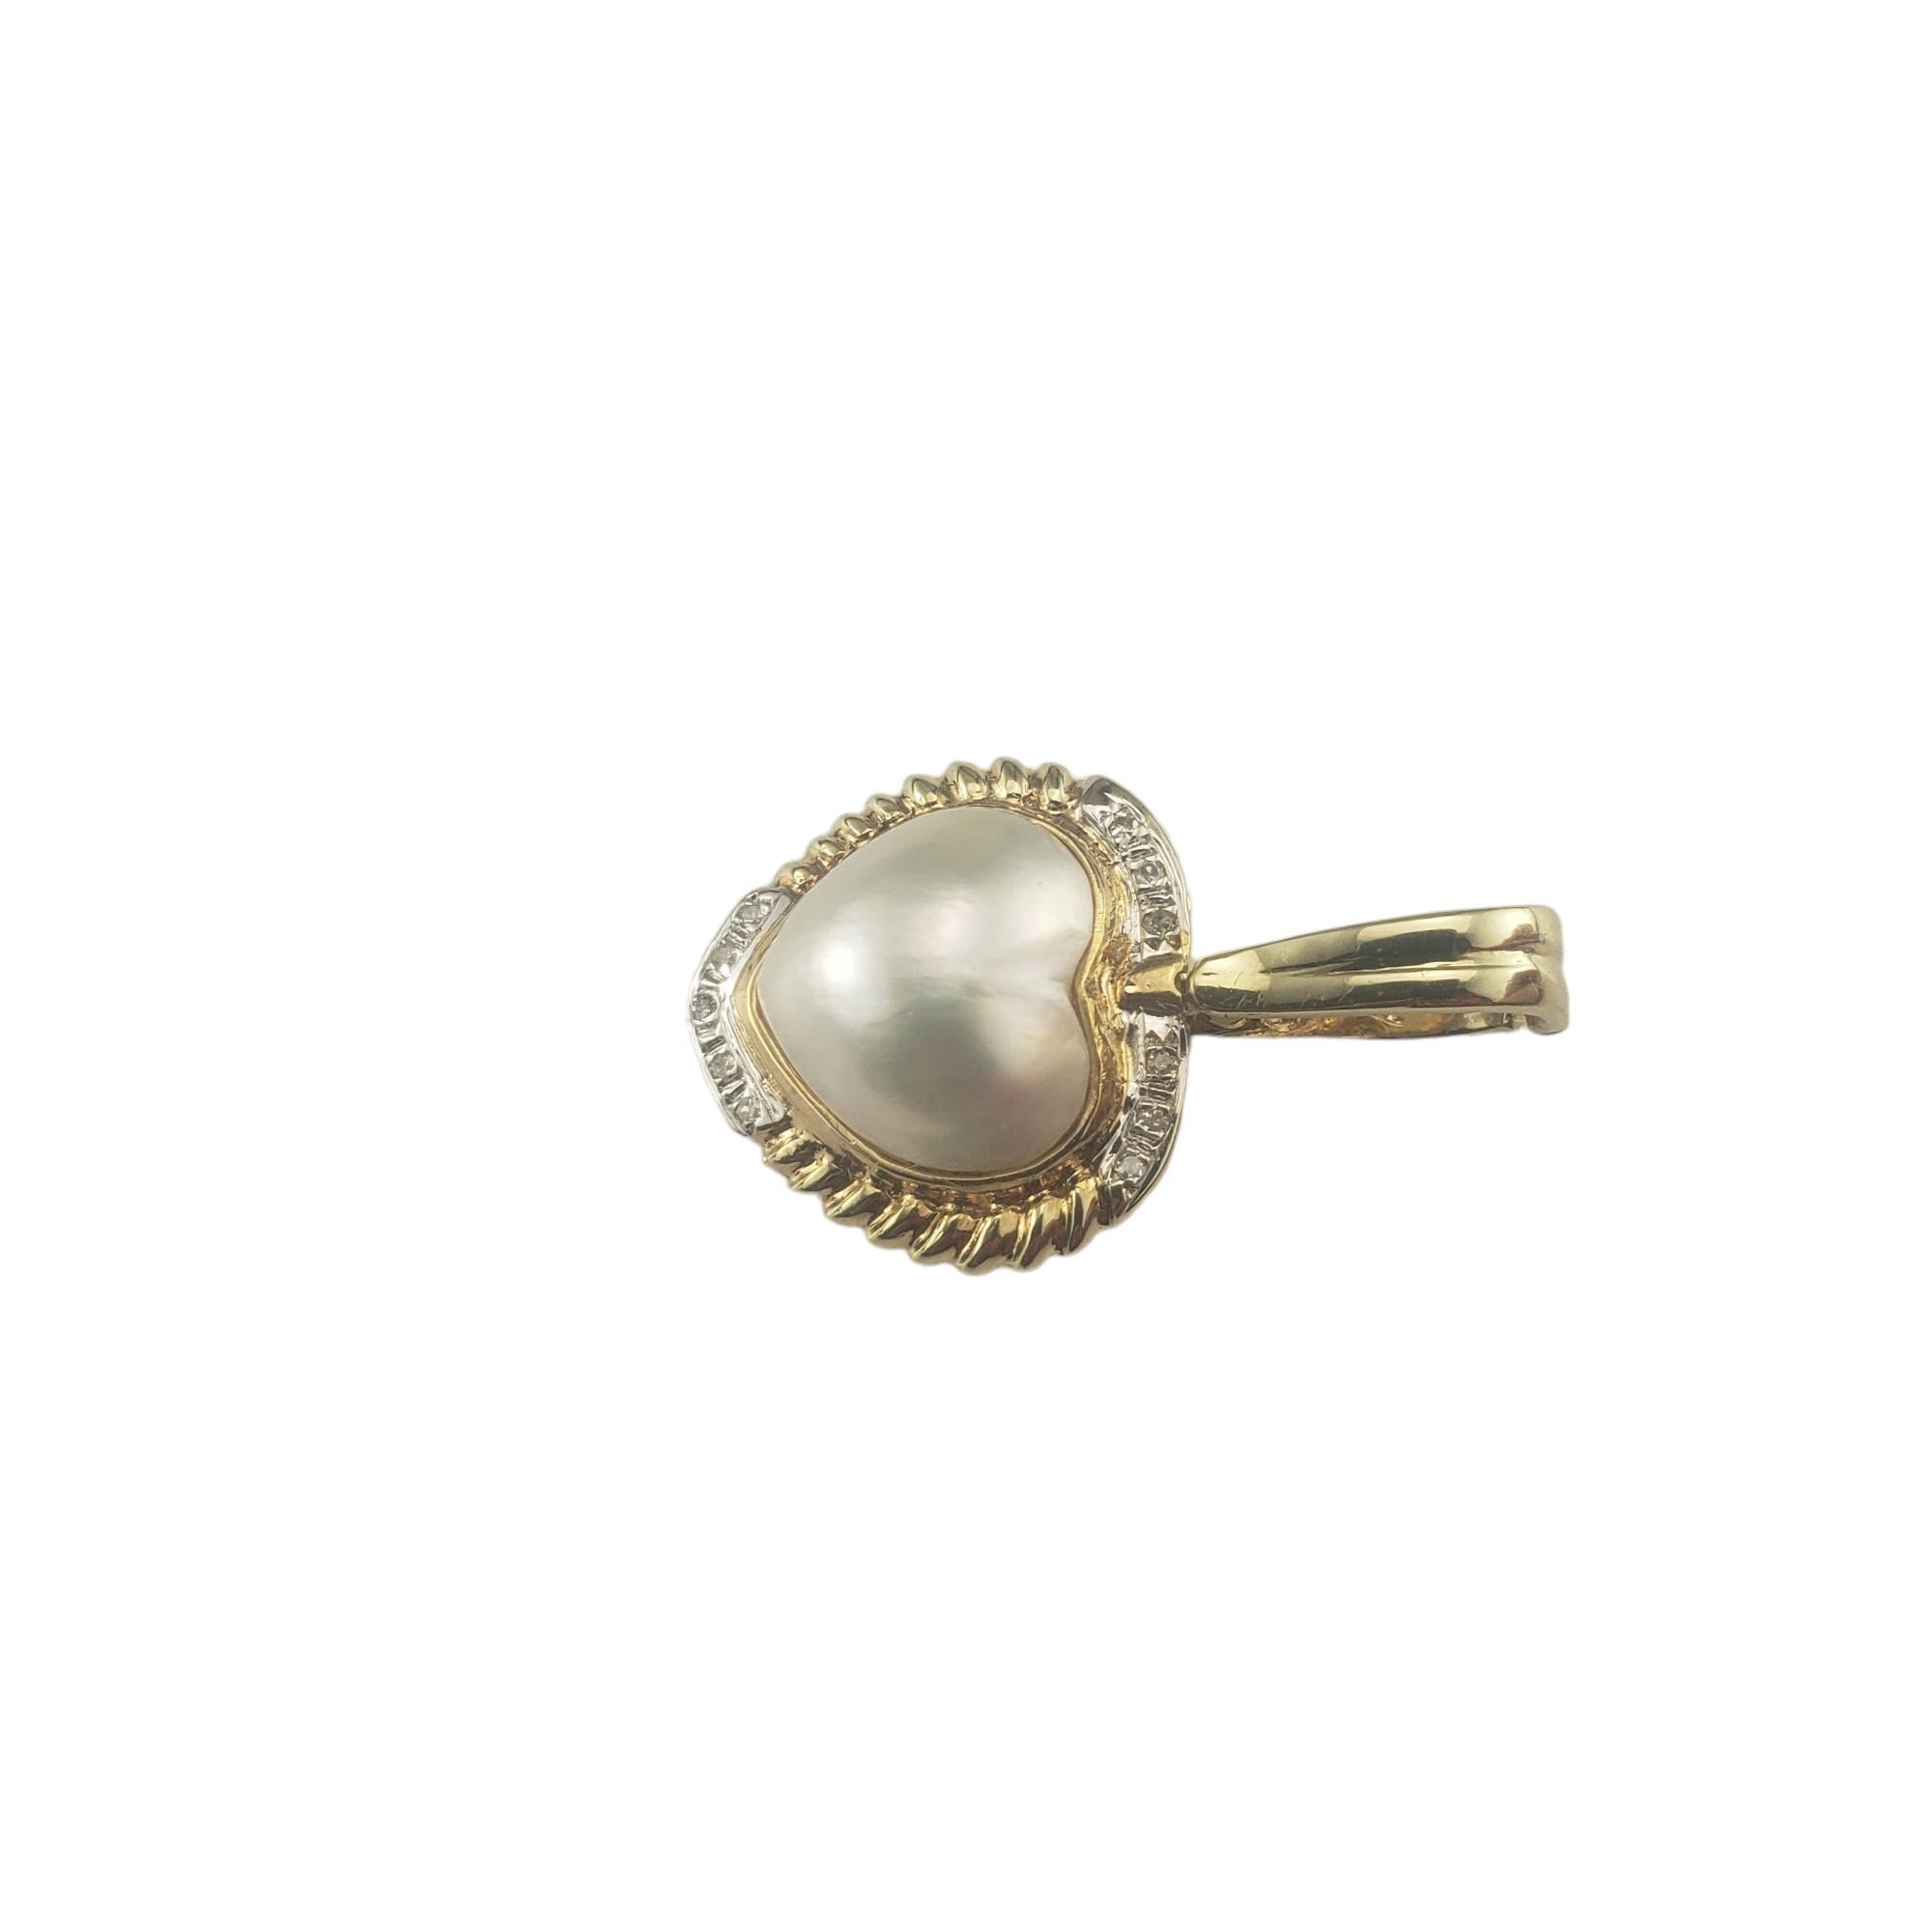 14 Karat Yellow Gold Pearl and Diamond Heart Pendant Enhancer-

This lovely pearl heart pendant features 11 round single cut diamonds set in classic 14K yellow gold.

Approximate total diamond weight: .05-.10 ct.

Diamond color: I

Diamond clarity: